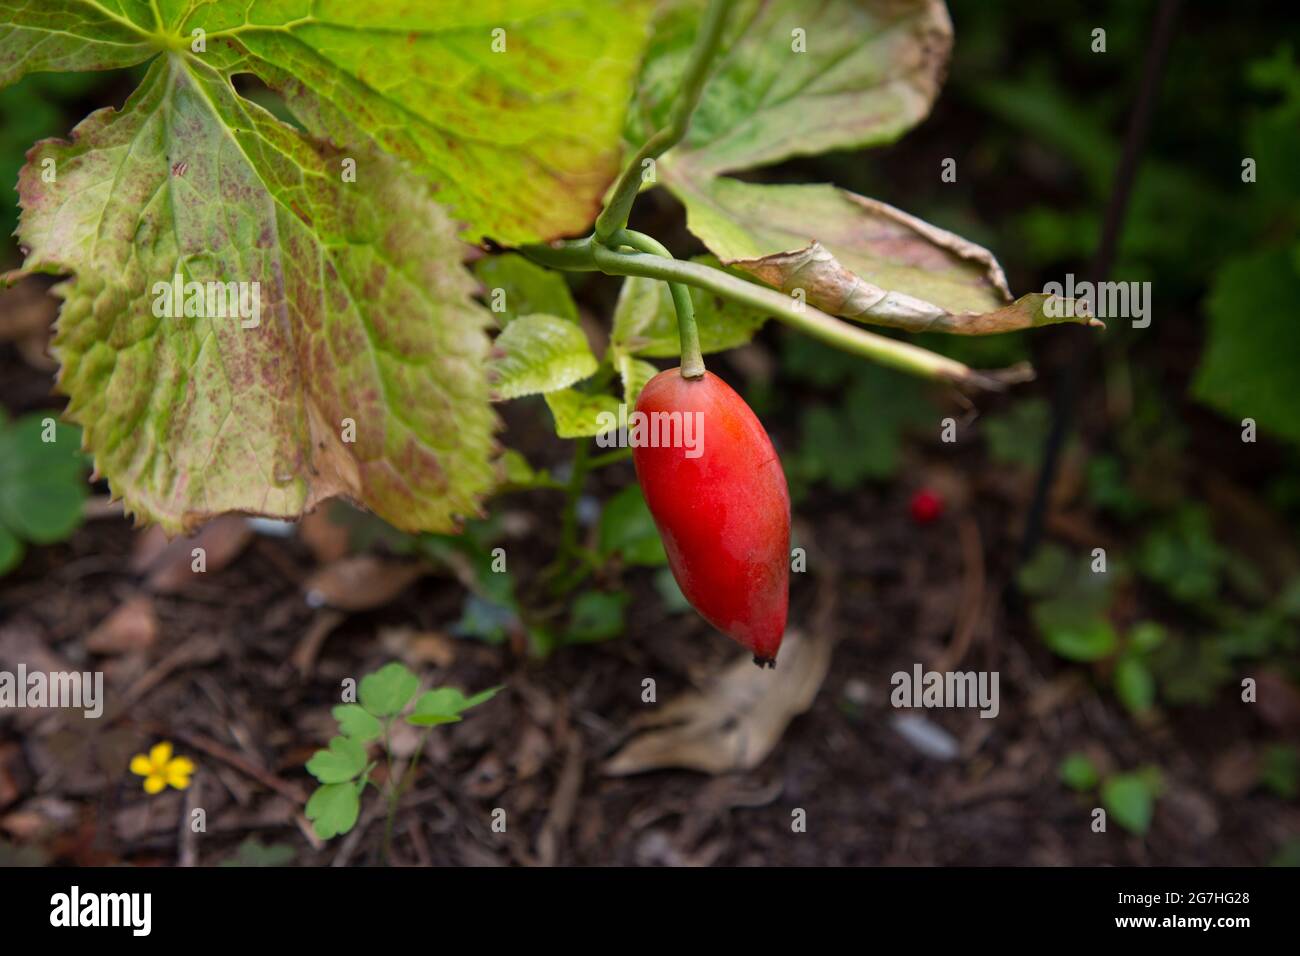 The ripe, red fruit of sinopodophyllum - an herbaceous perennial plant in the family Berberidaceae commonly known as Himalayan may apple. The root and Stock Photo